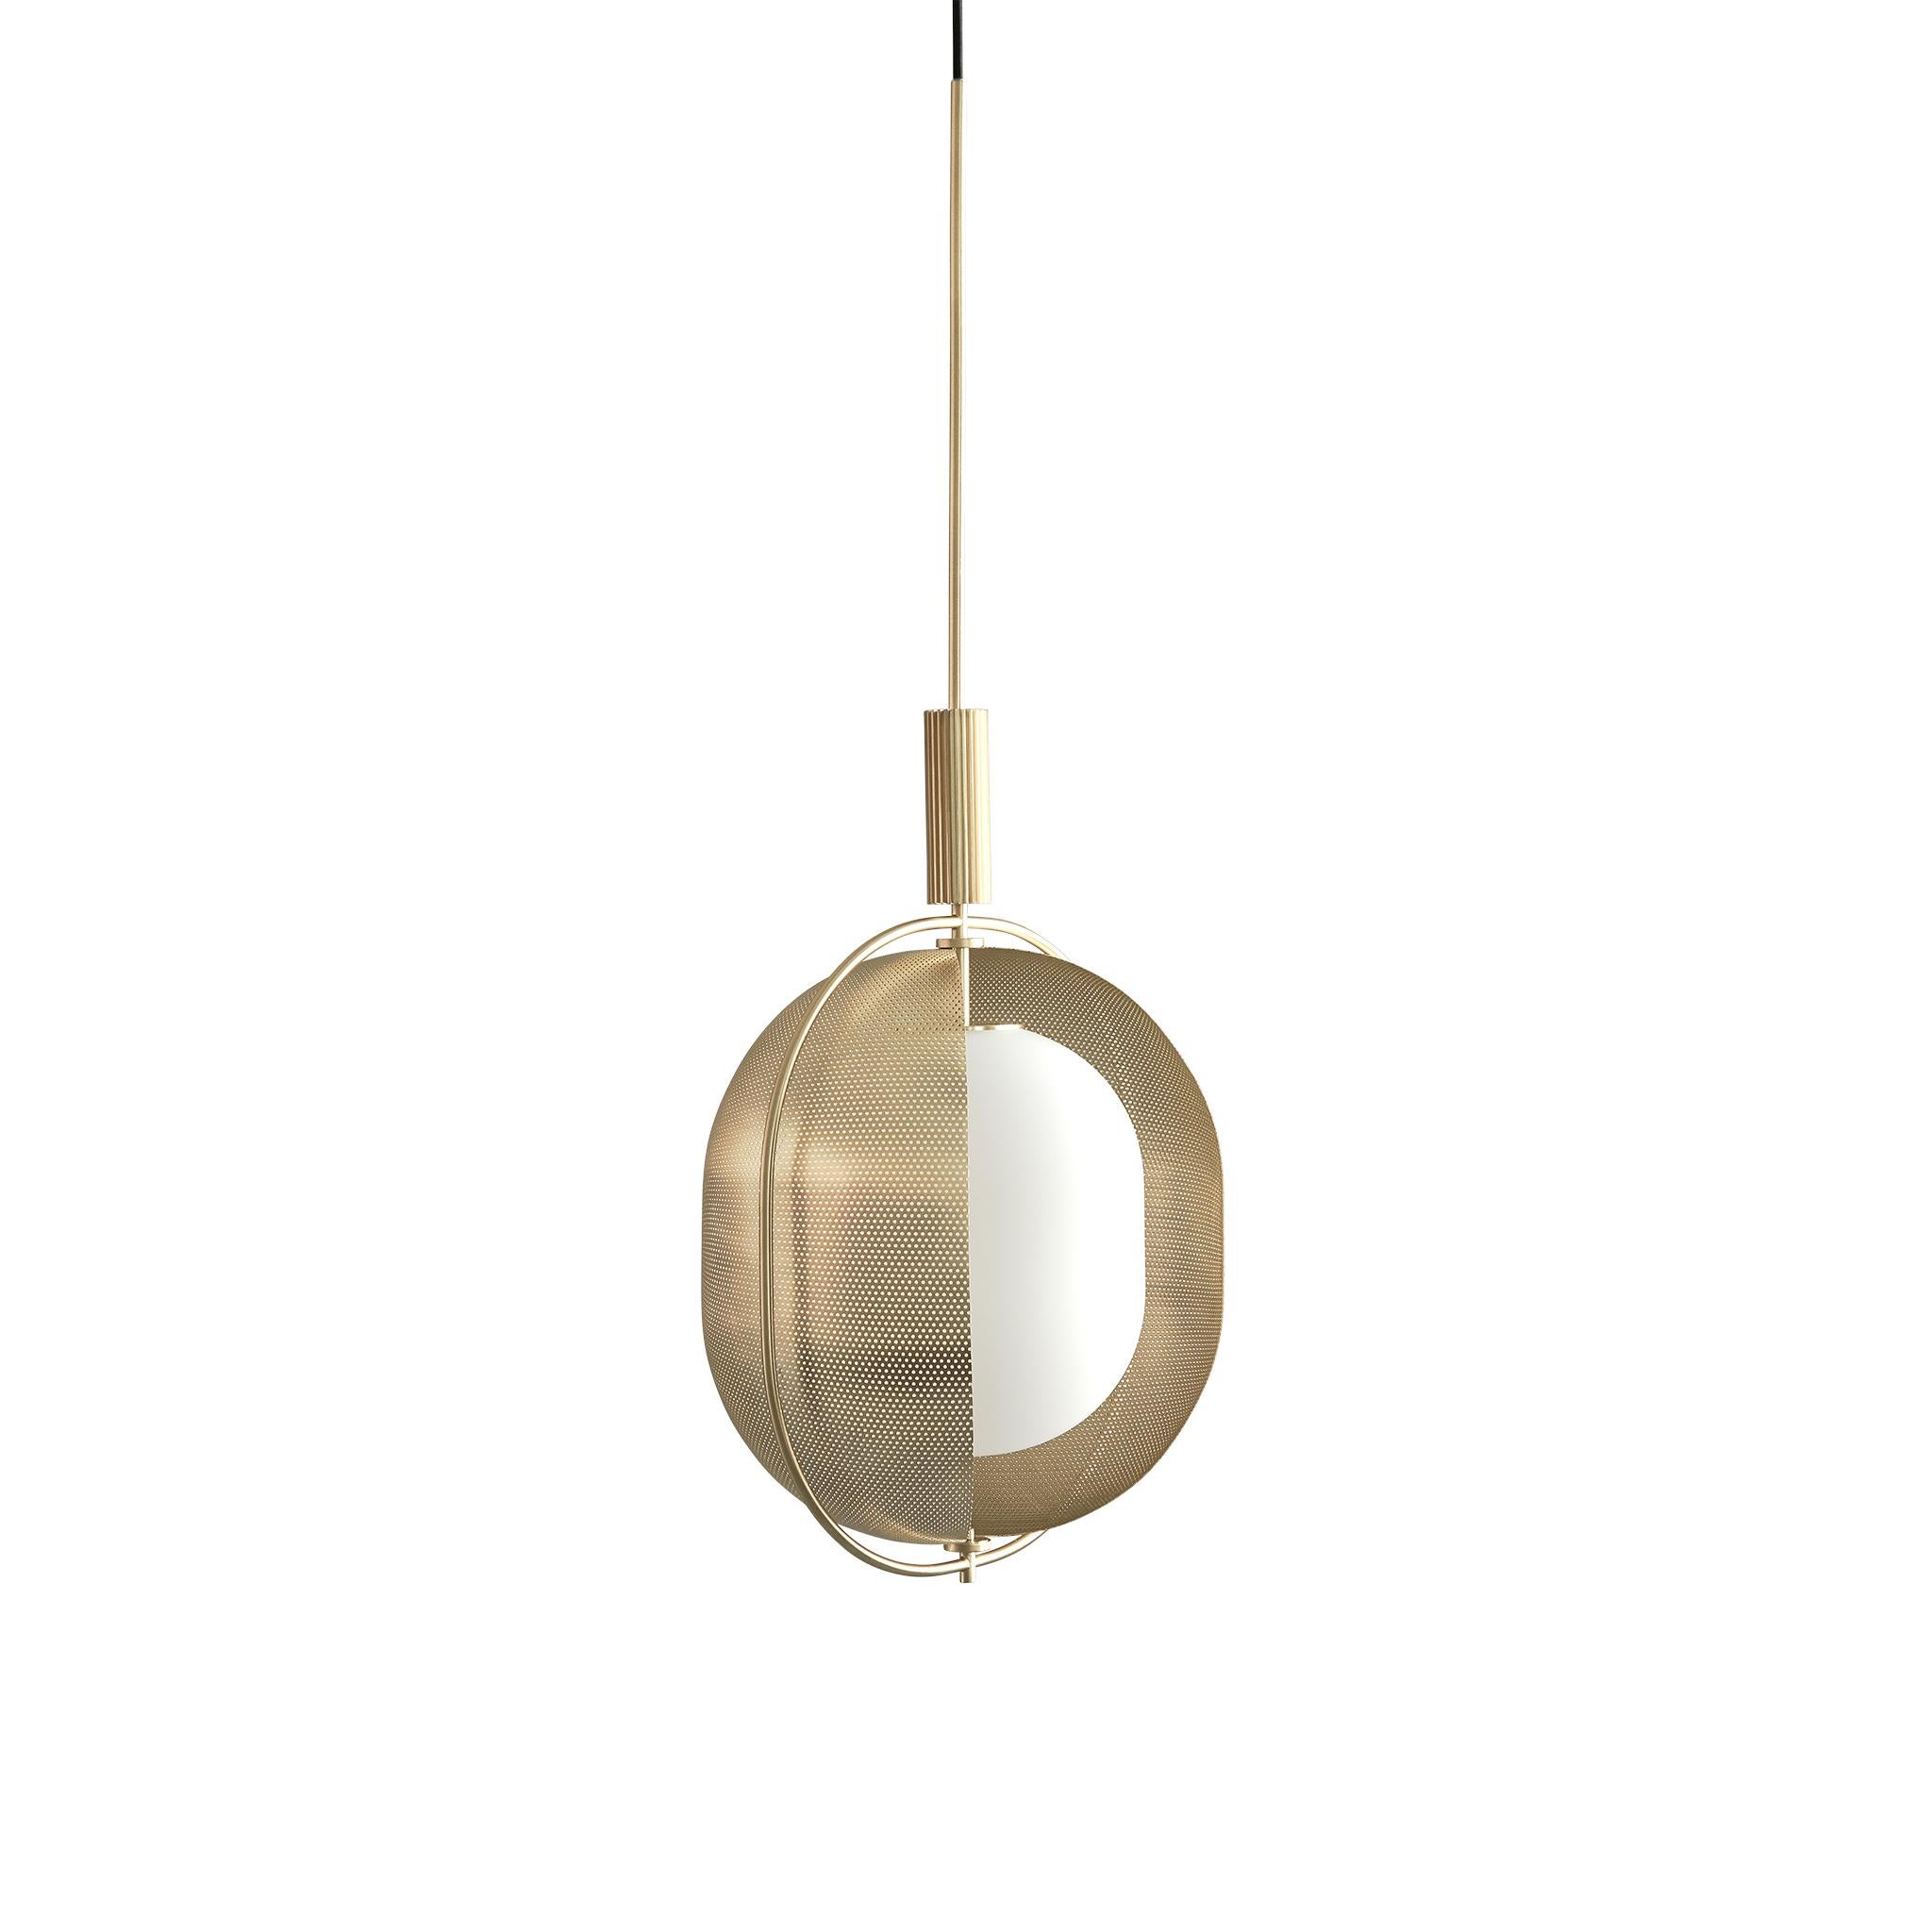 Pearl Pendant by 101 Copenhagen
Designed by Kristian Sofus Hansen & Tommy Hyldahl.
Dimensions: L 35 x W 35 x H 54,5 cm
This product is not wired for USA
Materials: All metal parts incl. frame, lampshade, ceiling cup, screws etc. are made of 100%